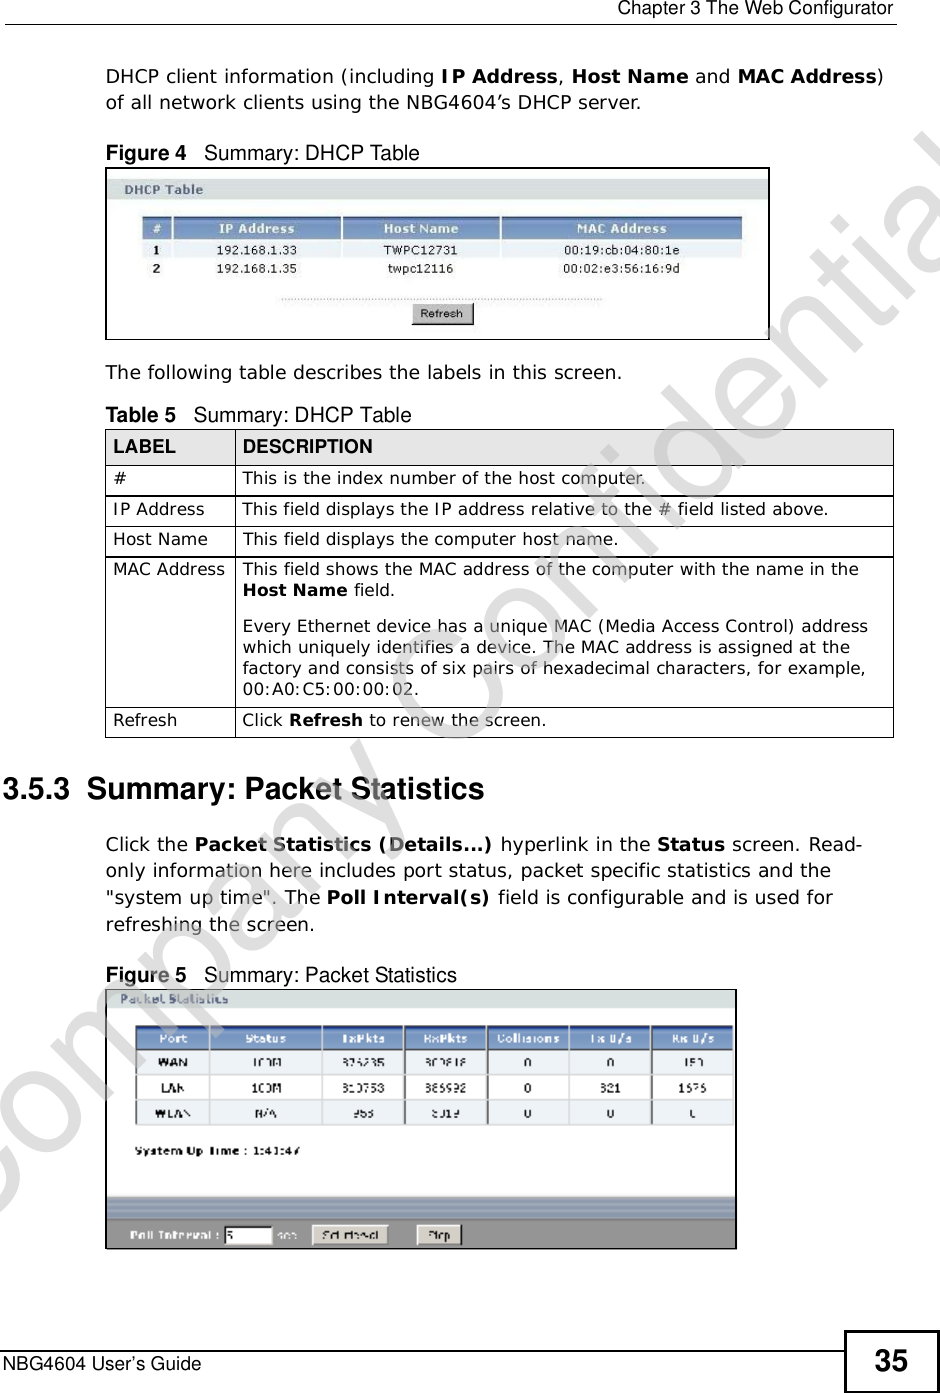  Chapter 3The Web ConfiguratorNBG4604 User’s Guide 35DHCP client information (including IP Address,HostName and MAC Address)of all network clients using the NBG4604’s DHCP server.Figure 4   Summary: DHCP TableThe following table describes the labels in this screen.3.5.3  Summary: Packet Statistics   Click the Packet Statistics (Details...) hyperlink in the Status screen. Read-only information here includes port status, packet specific statistics and the &quot;system up time&quot;. The Poll Interval(s) field is configurable and is used for refreshing the screen.Figure 5   Summary: Packet Statistics Table 5   Summary: DHCP TableLABEL  DESCRIPTION# This is the index number of the host computer.IP AddressThis field displays the IP address relative to the # field listed above.Host Name This field displays the computer host name.MAC AddressThis field shows the MAC address of the computer with the name in the Host Name field.Every Ethernet device has a unique MAC (Media Access Control) address which uniquely identifies a device. The MAC address is assigned at the factory and consists of six pairs of hexadecimal characters, for example, 00:A0:C5:00:00:02.RefreshClick Refresh to renew the screen. Company Confidential